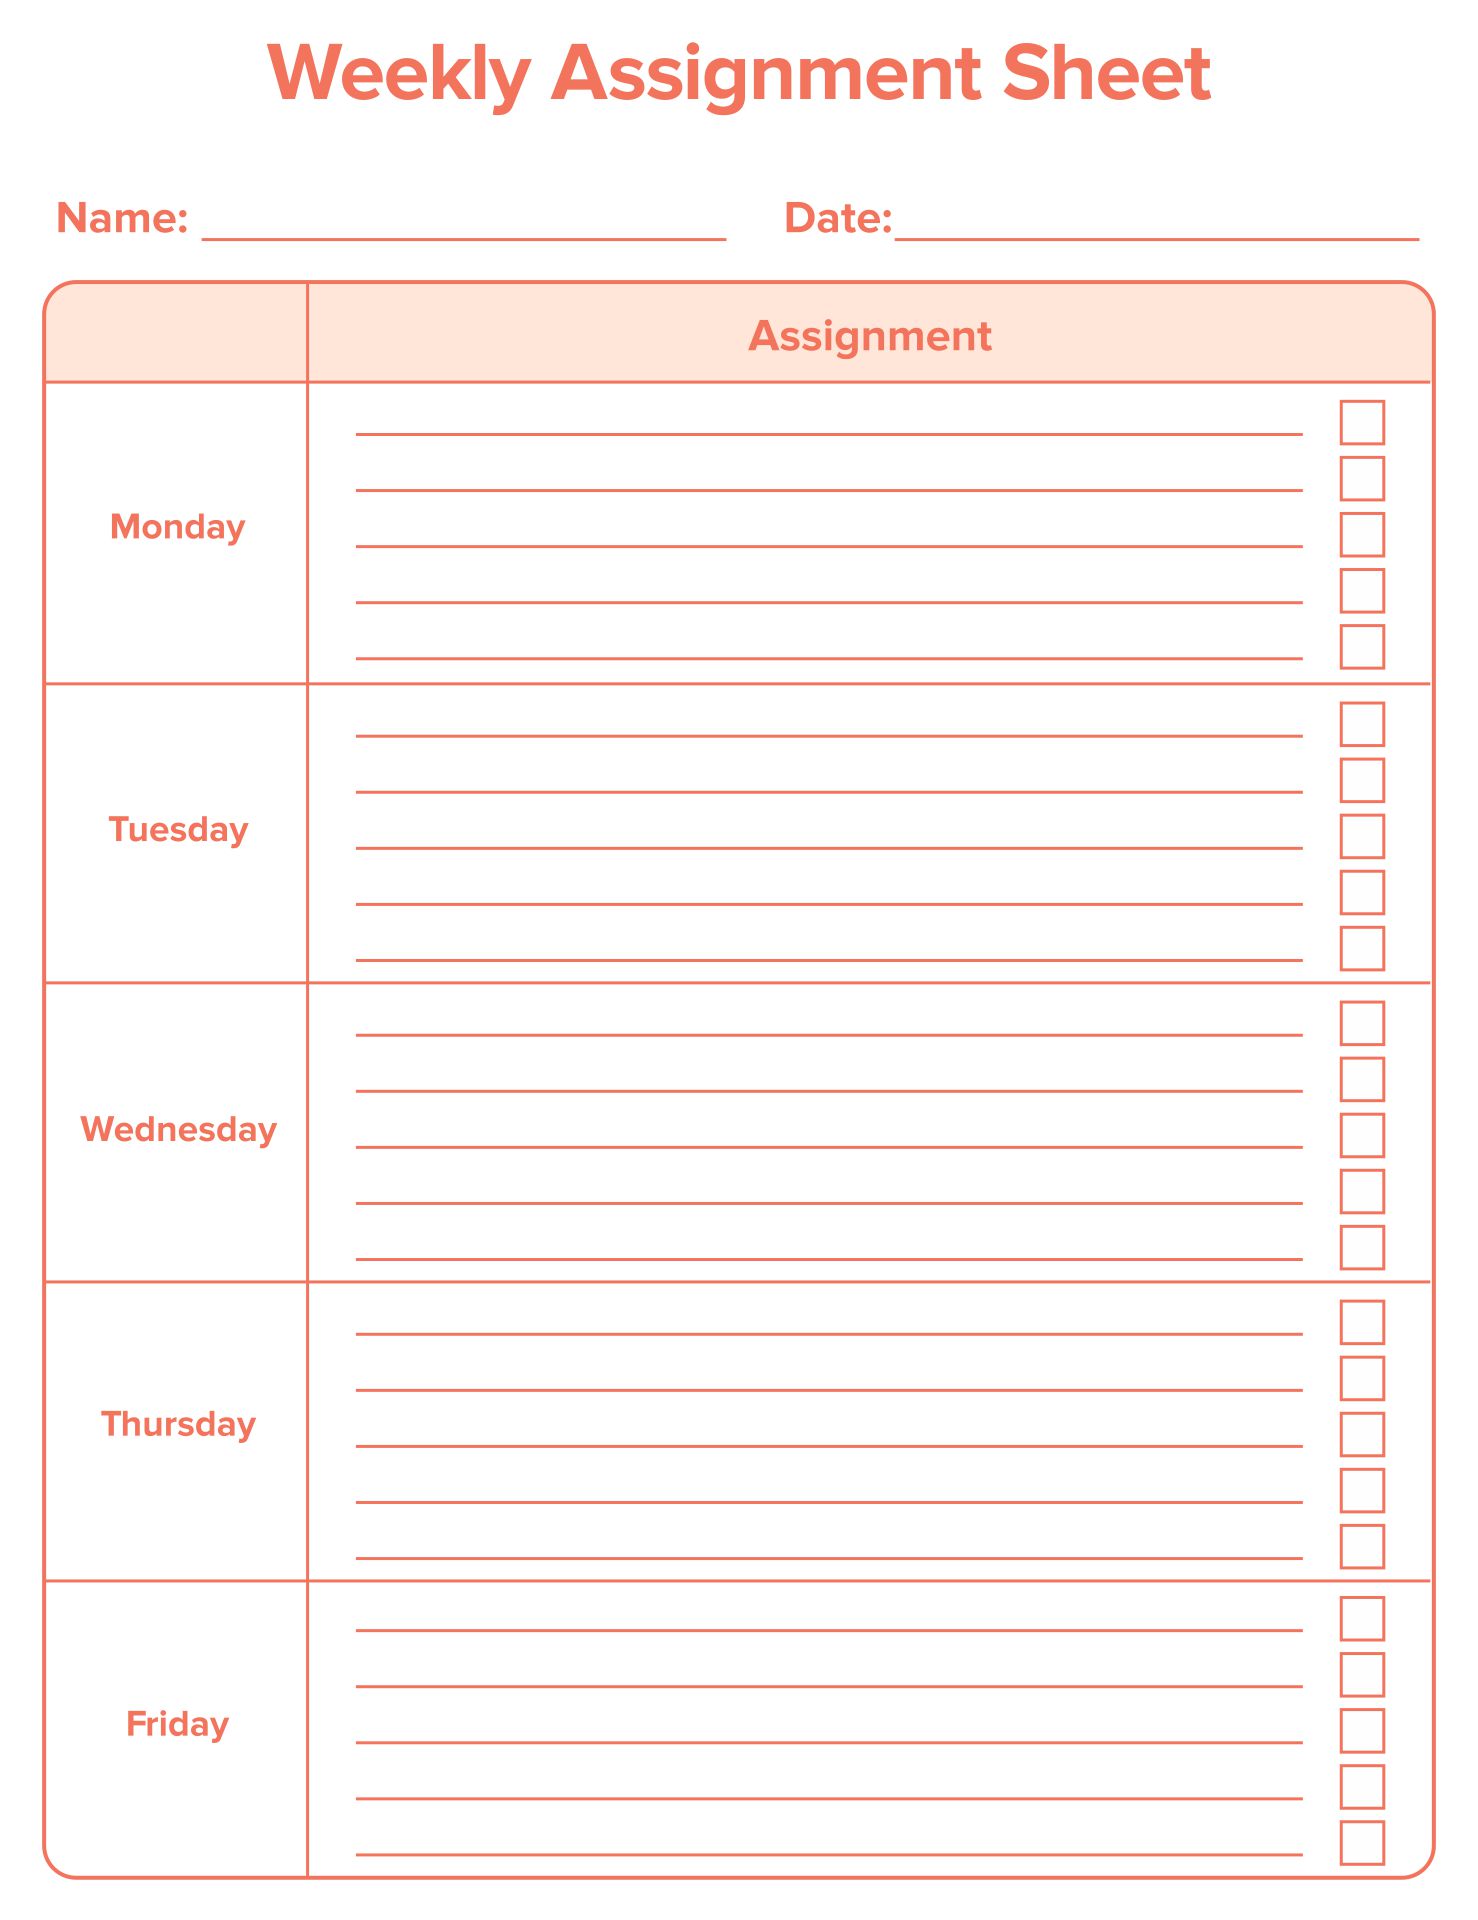 Printable Weekly Assignment Sheet